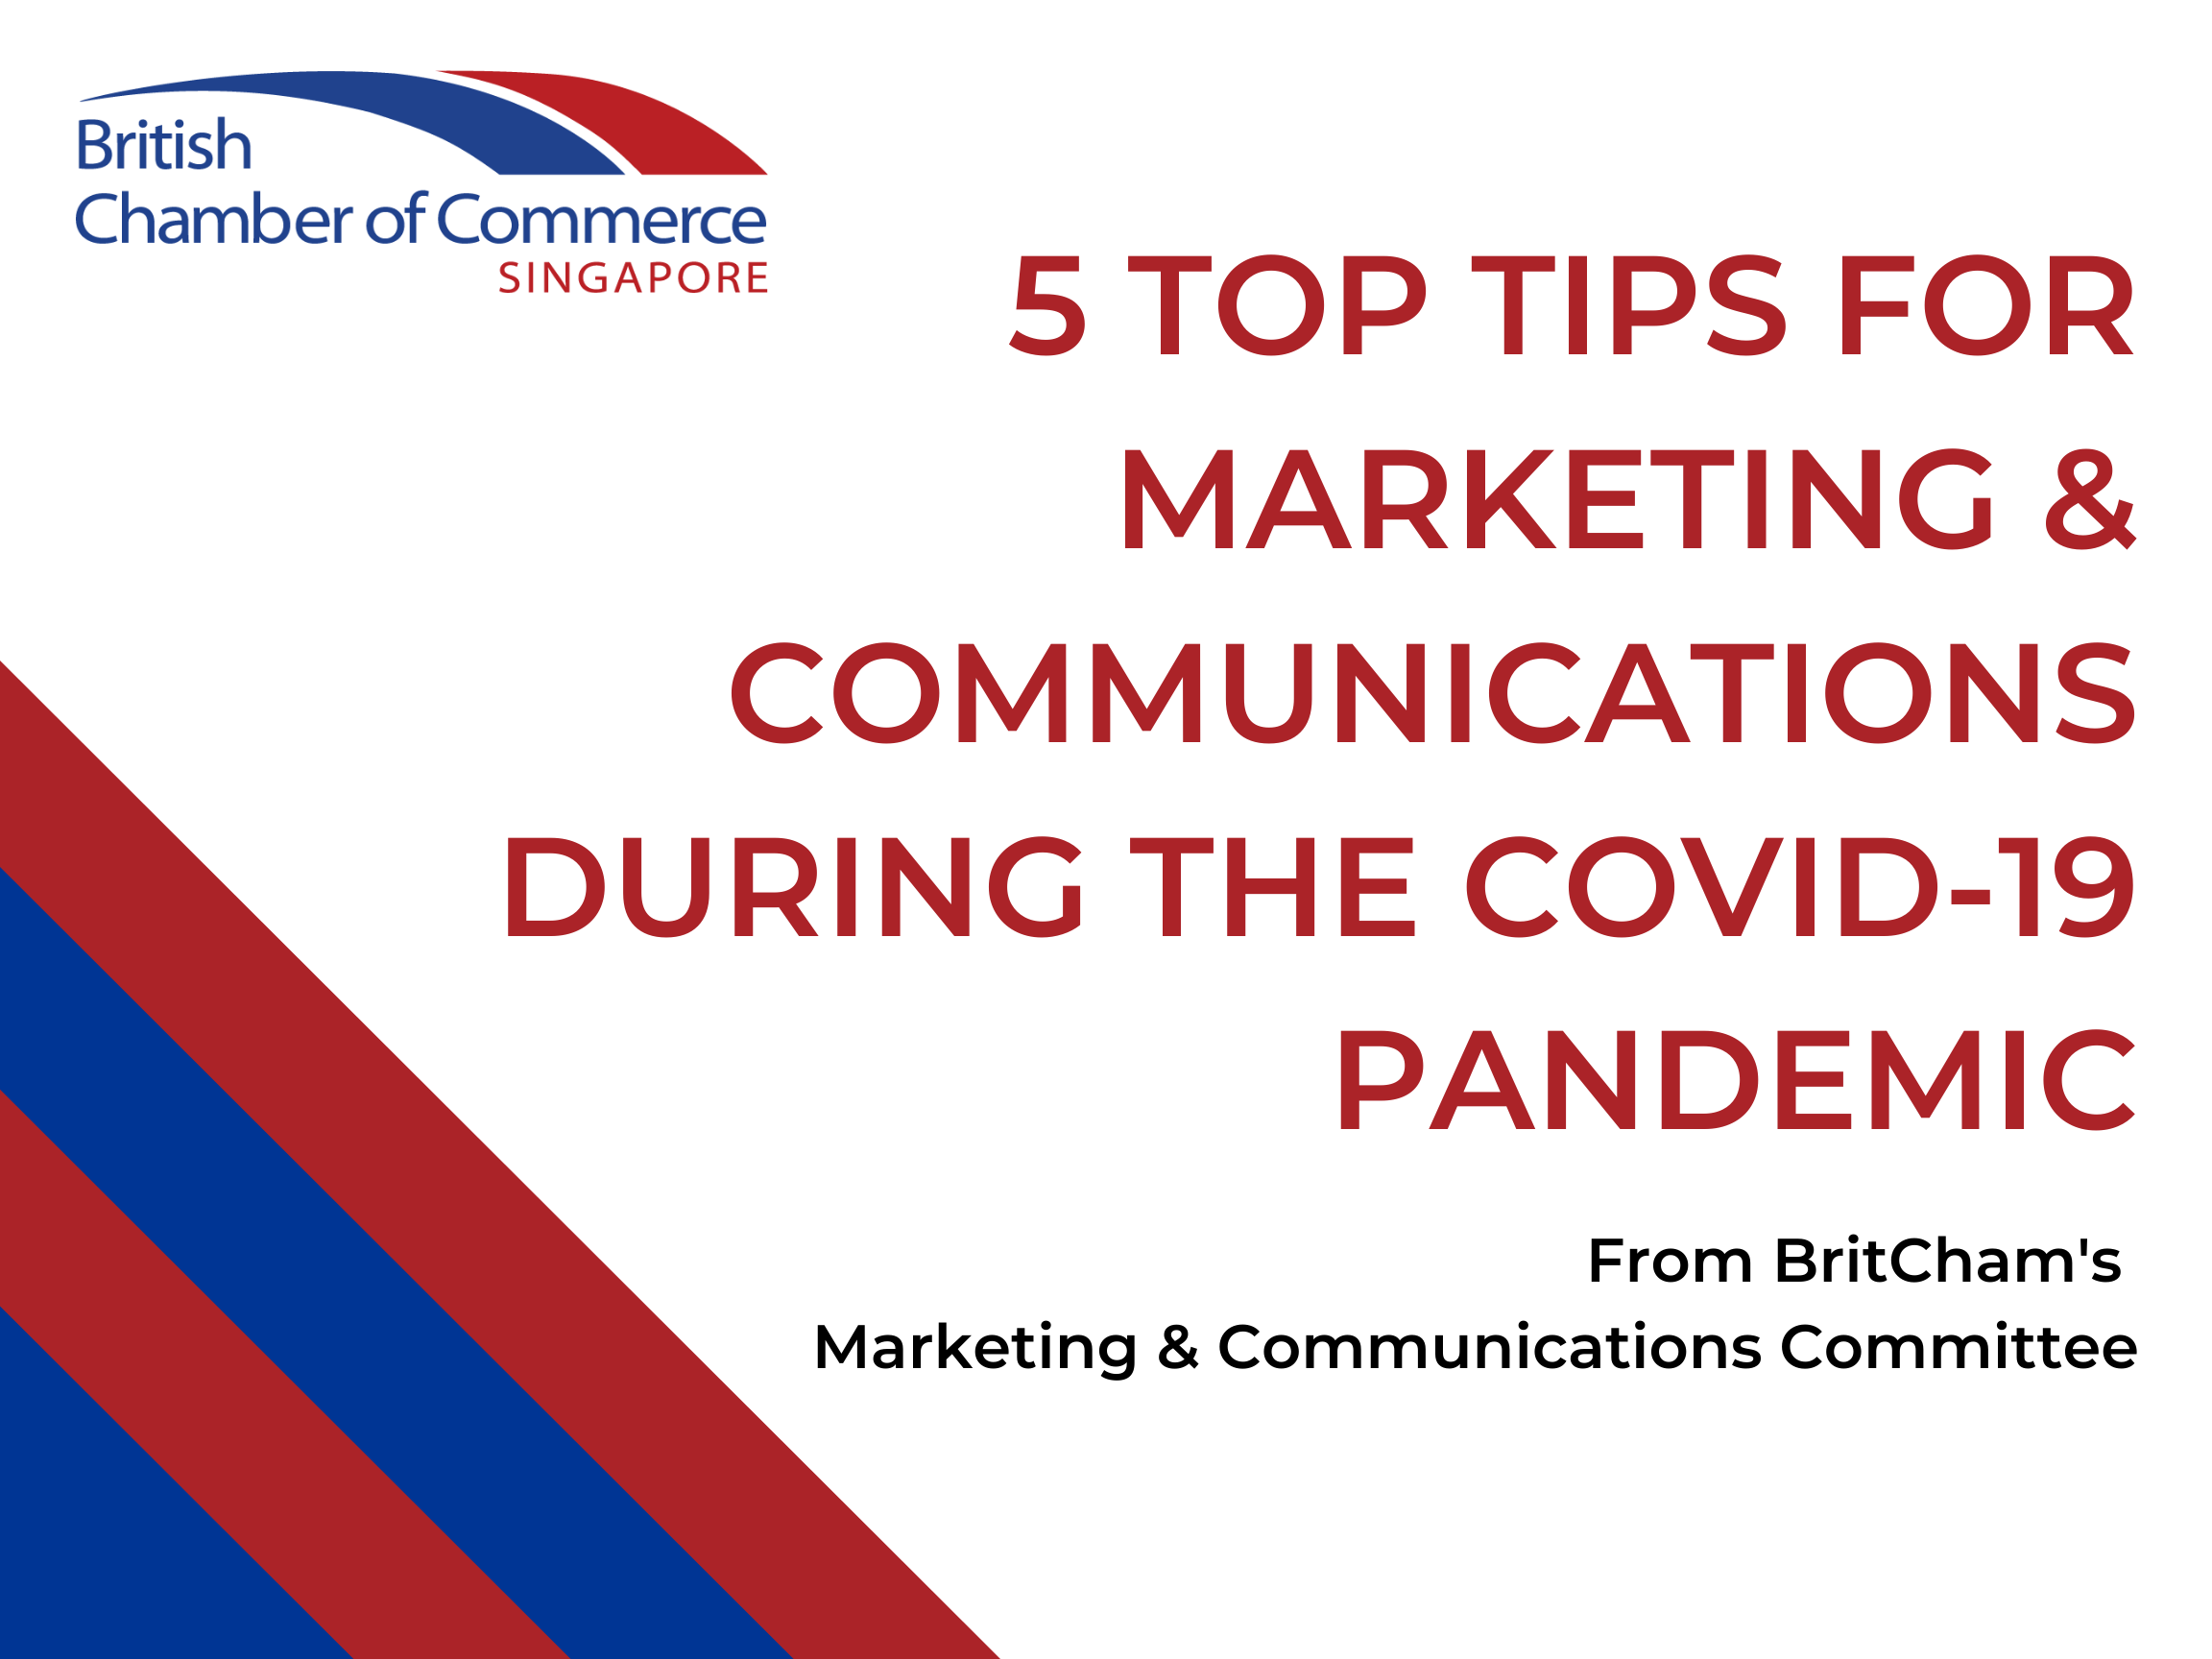 5 Top Tips for Marketing & Communications during the COVID-19 pandemic